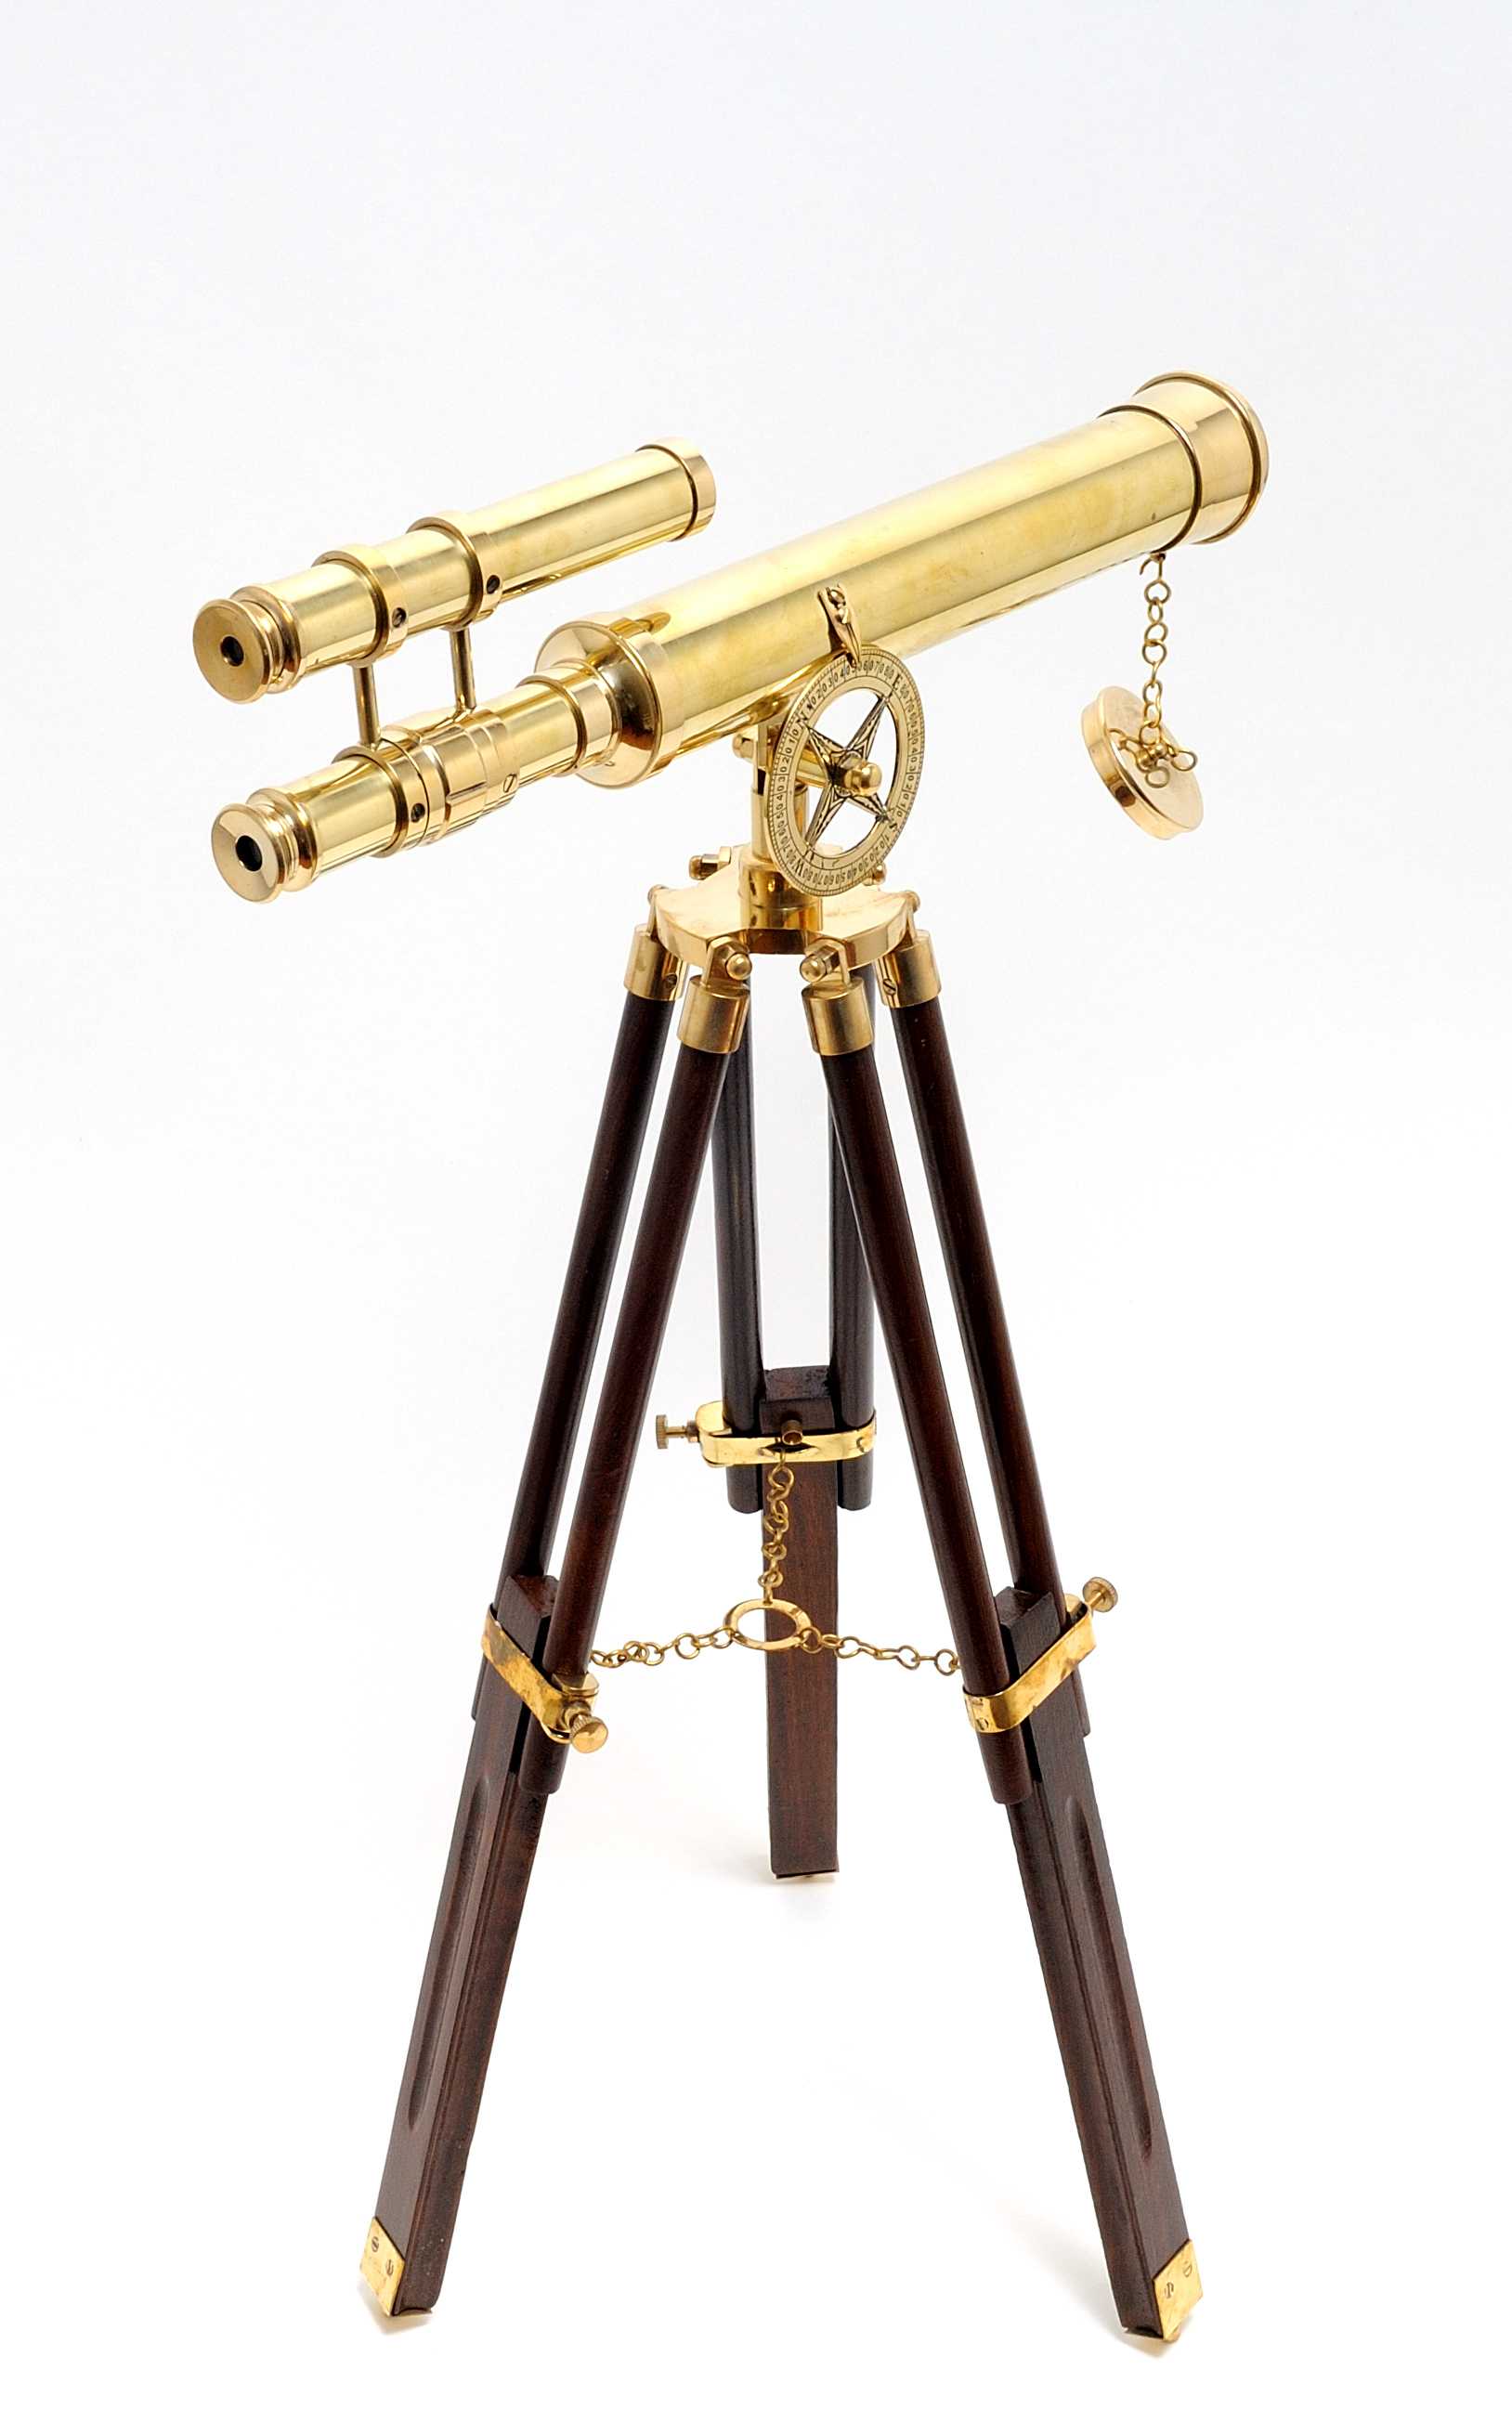 2.25" x 17.5" x 26" Telescope with Stand